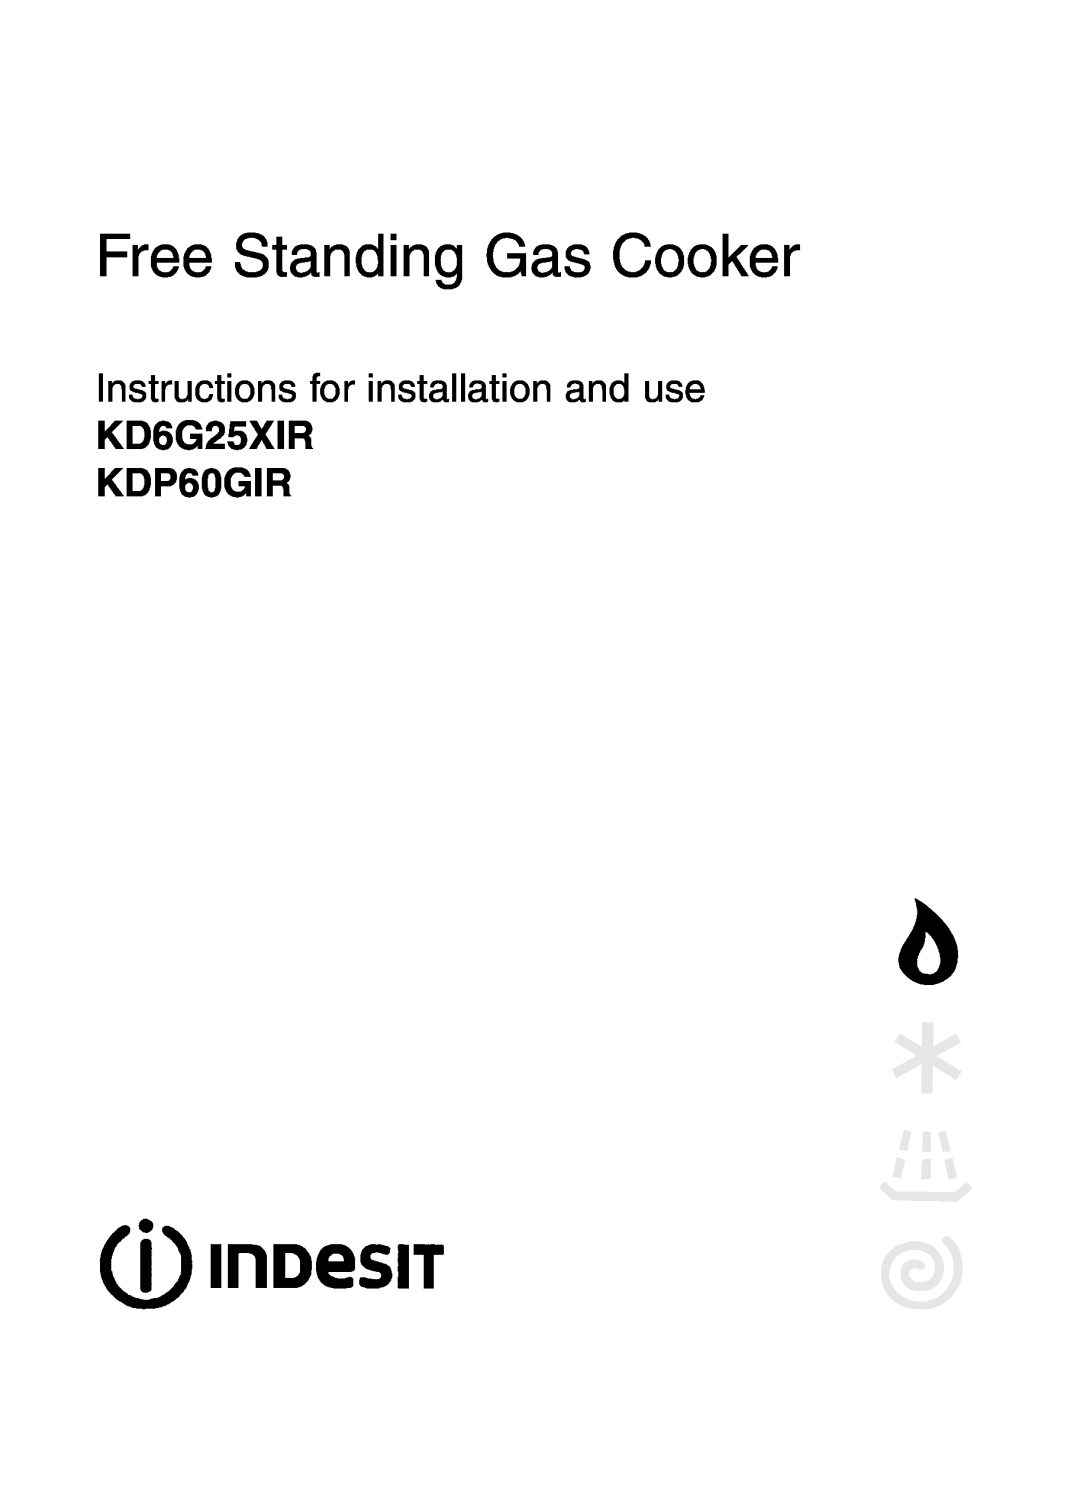 Indesit manual Free Standing Gas Cooker, Instructions for installation and use, KD6G25XIR KDP60GIR 